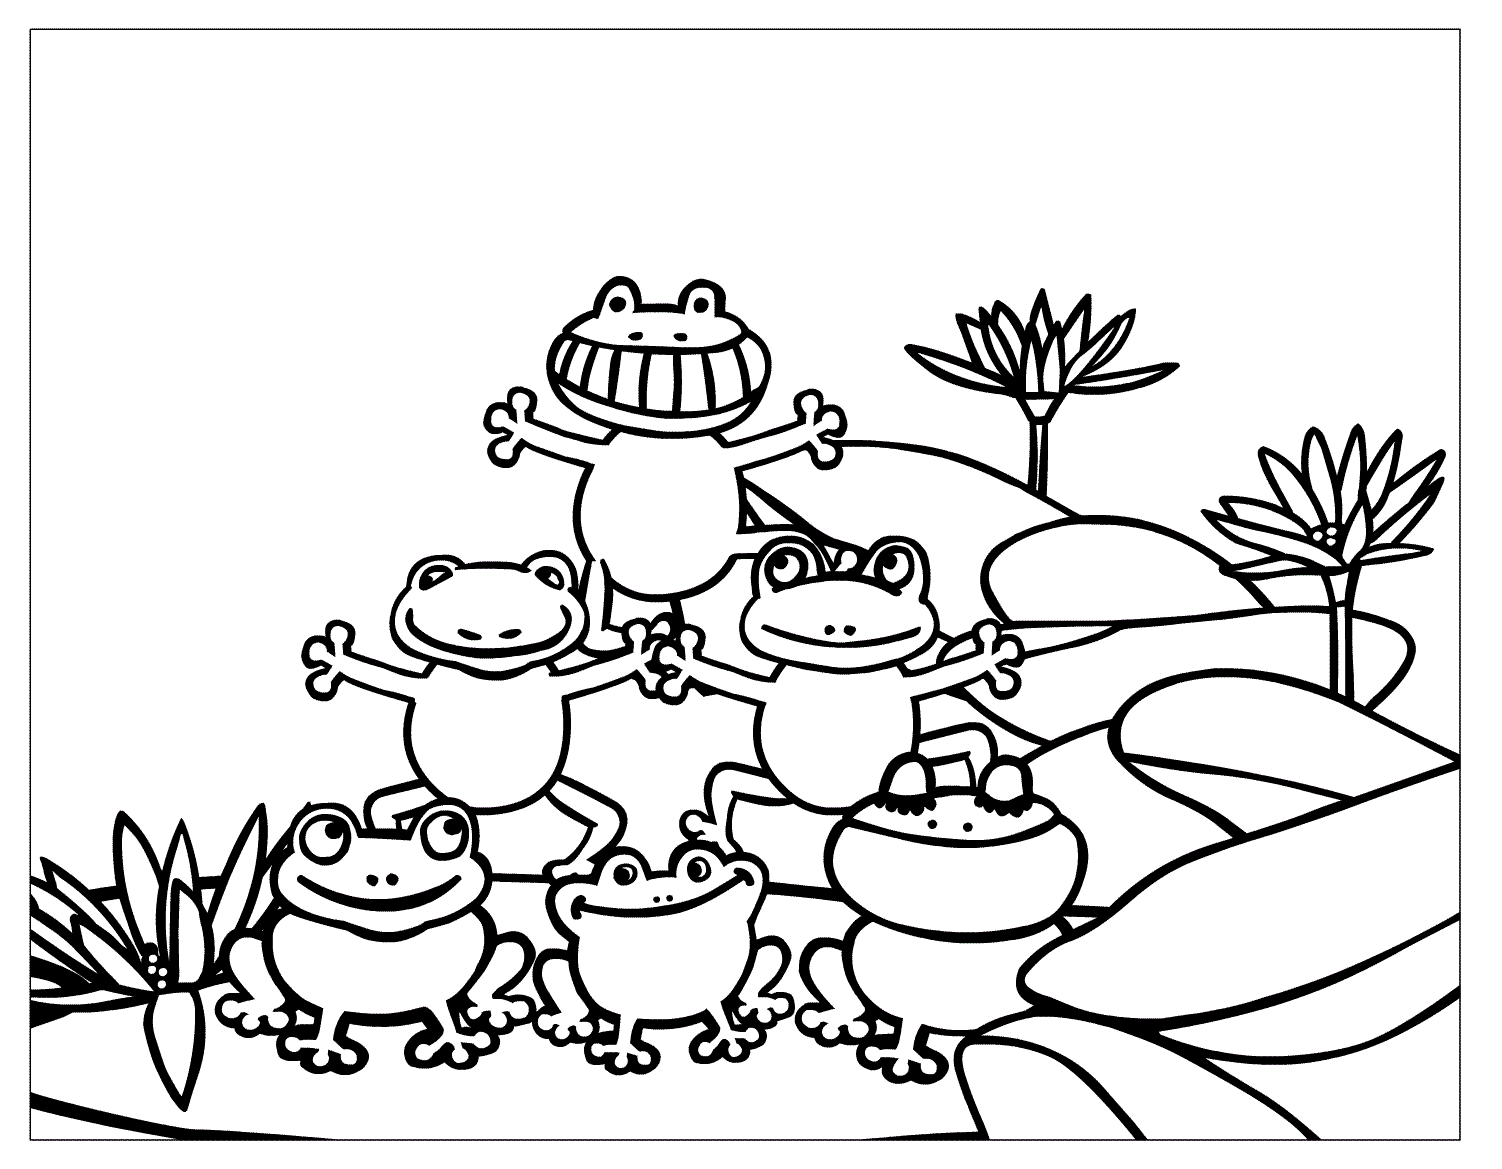 queen frog coloring pages for kids - photo #32